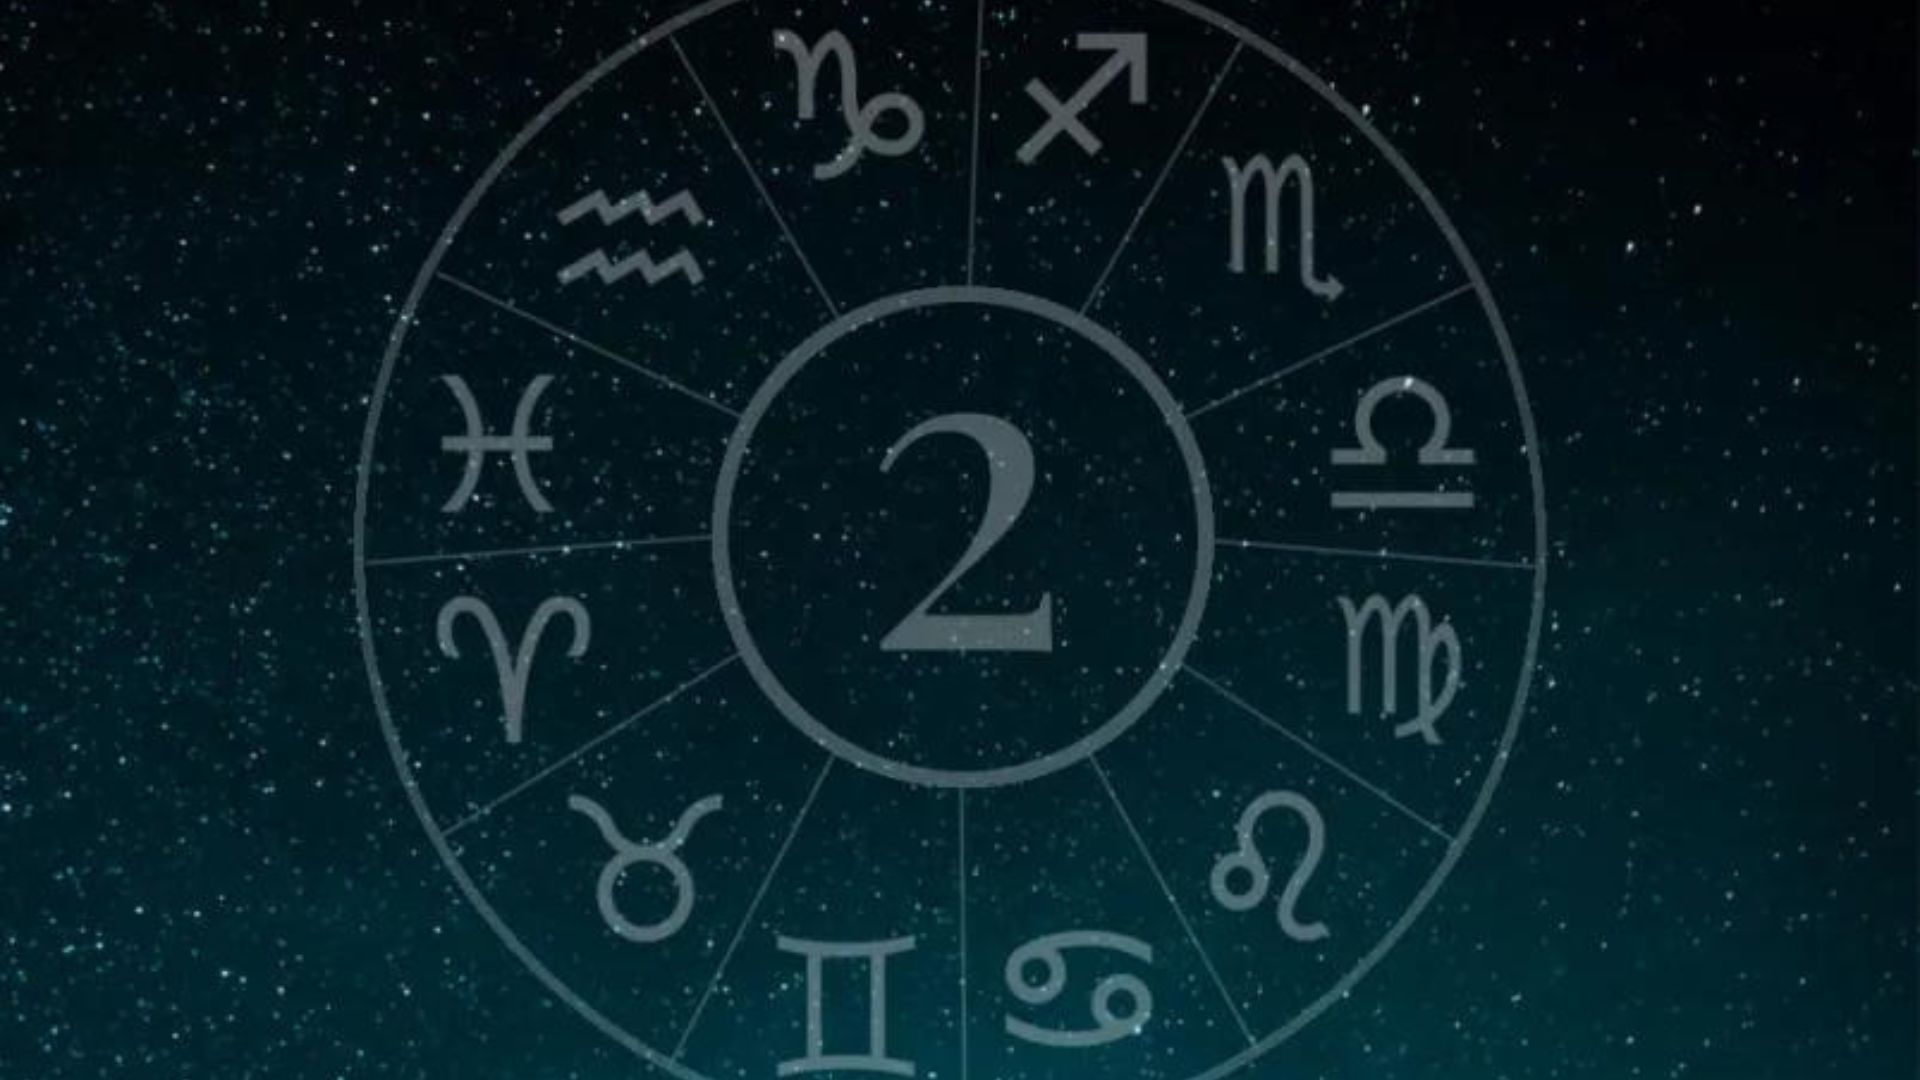 Zodiac Signs In Circle And Number 2 In Center Of Circle